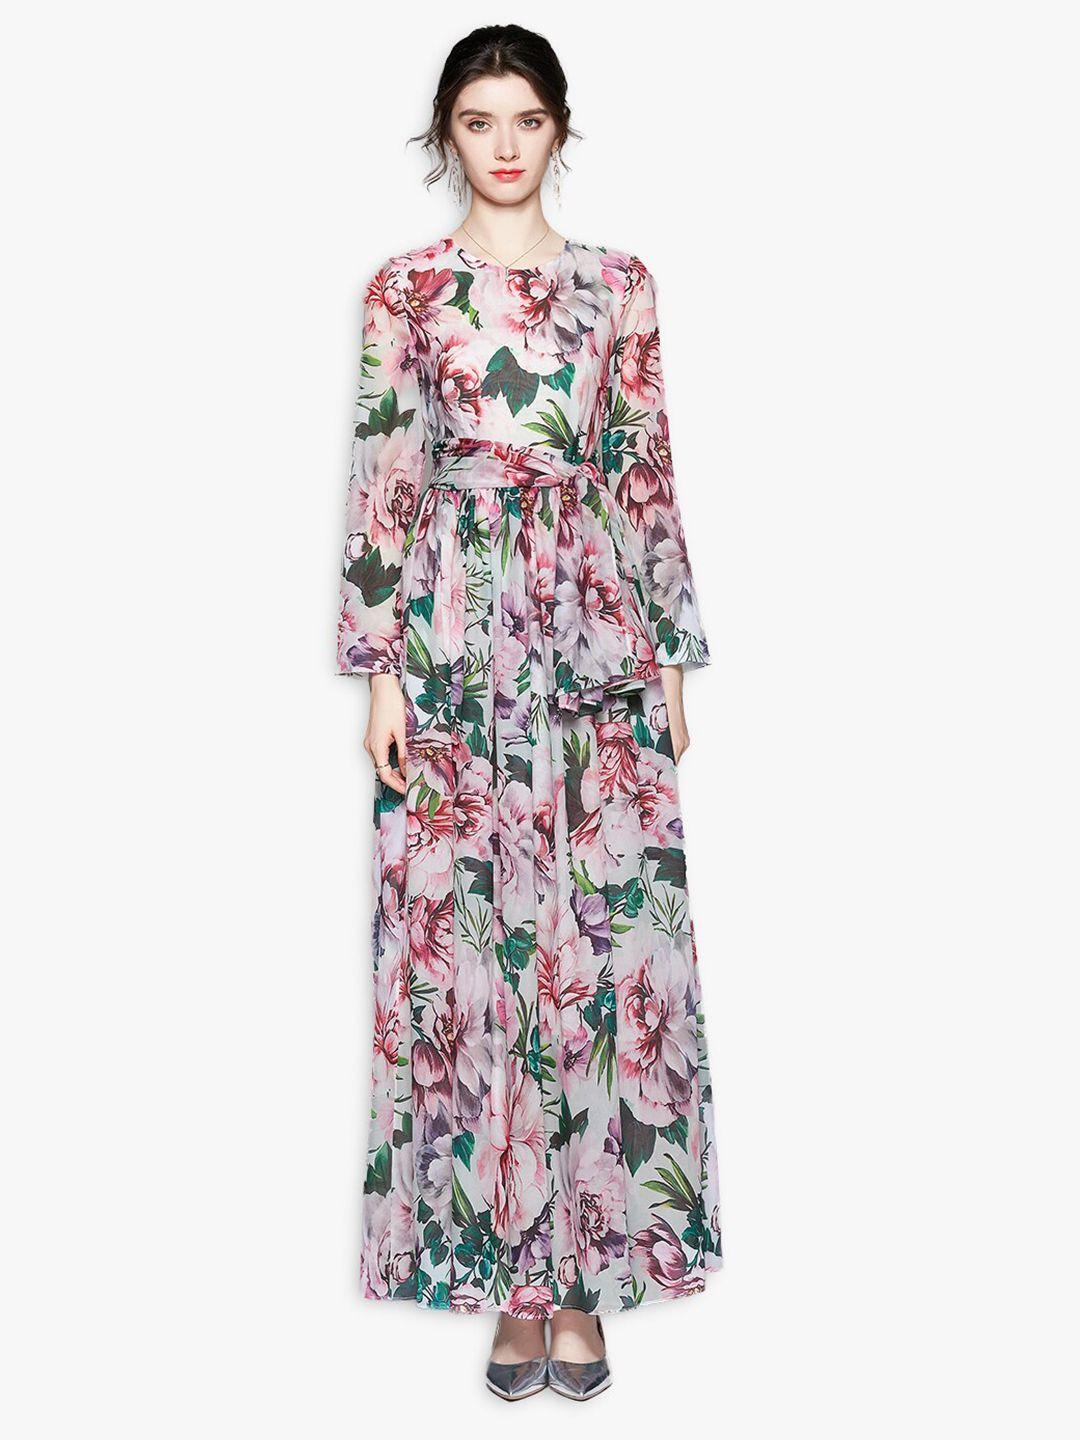 jc collection pink & green floral maxi dress